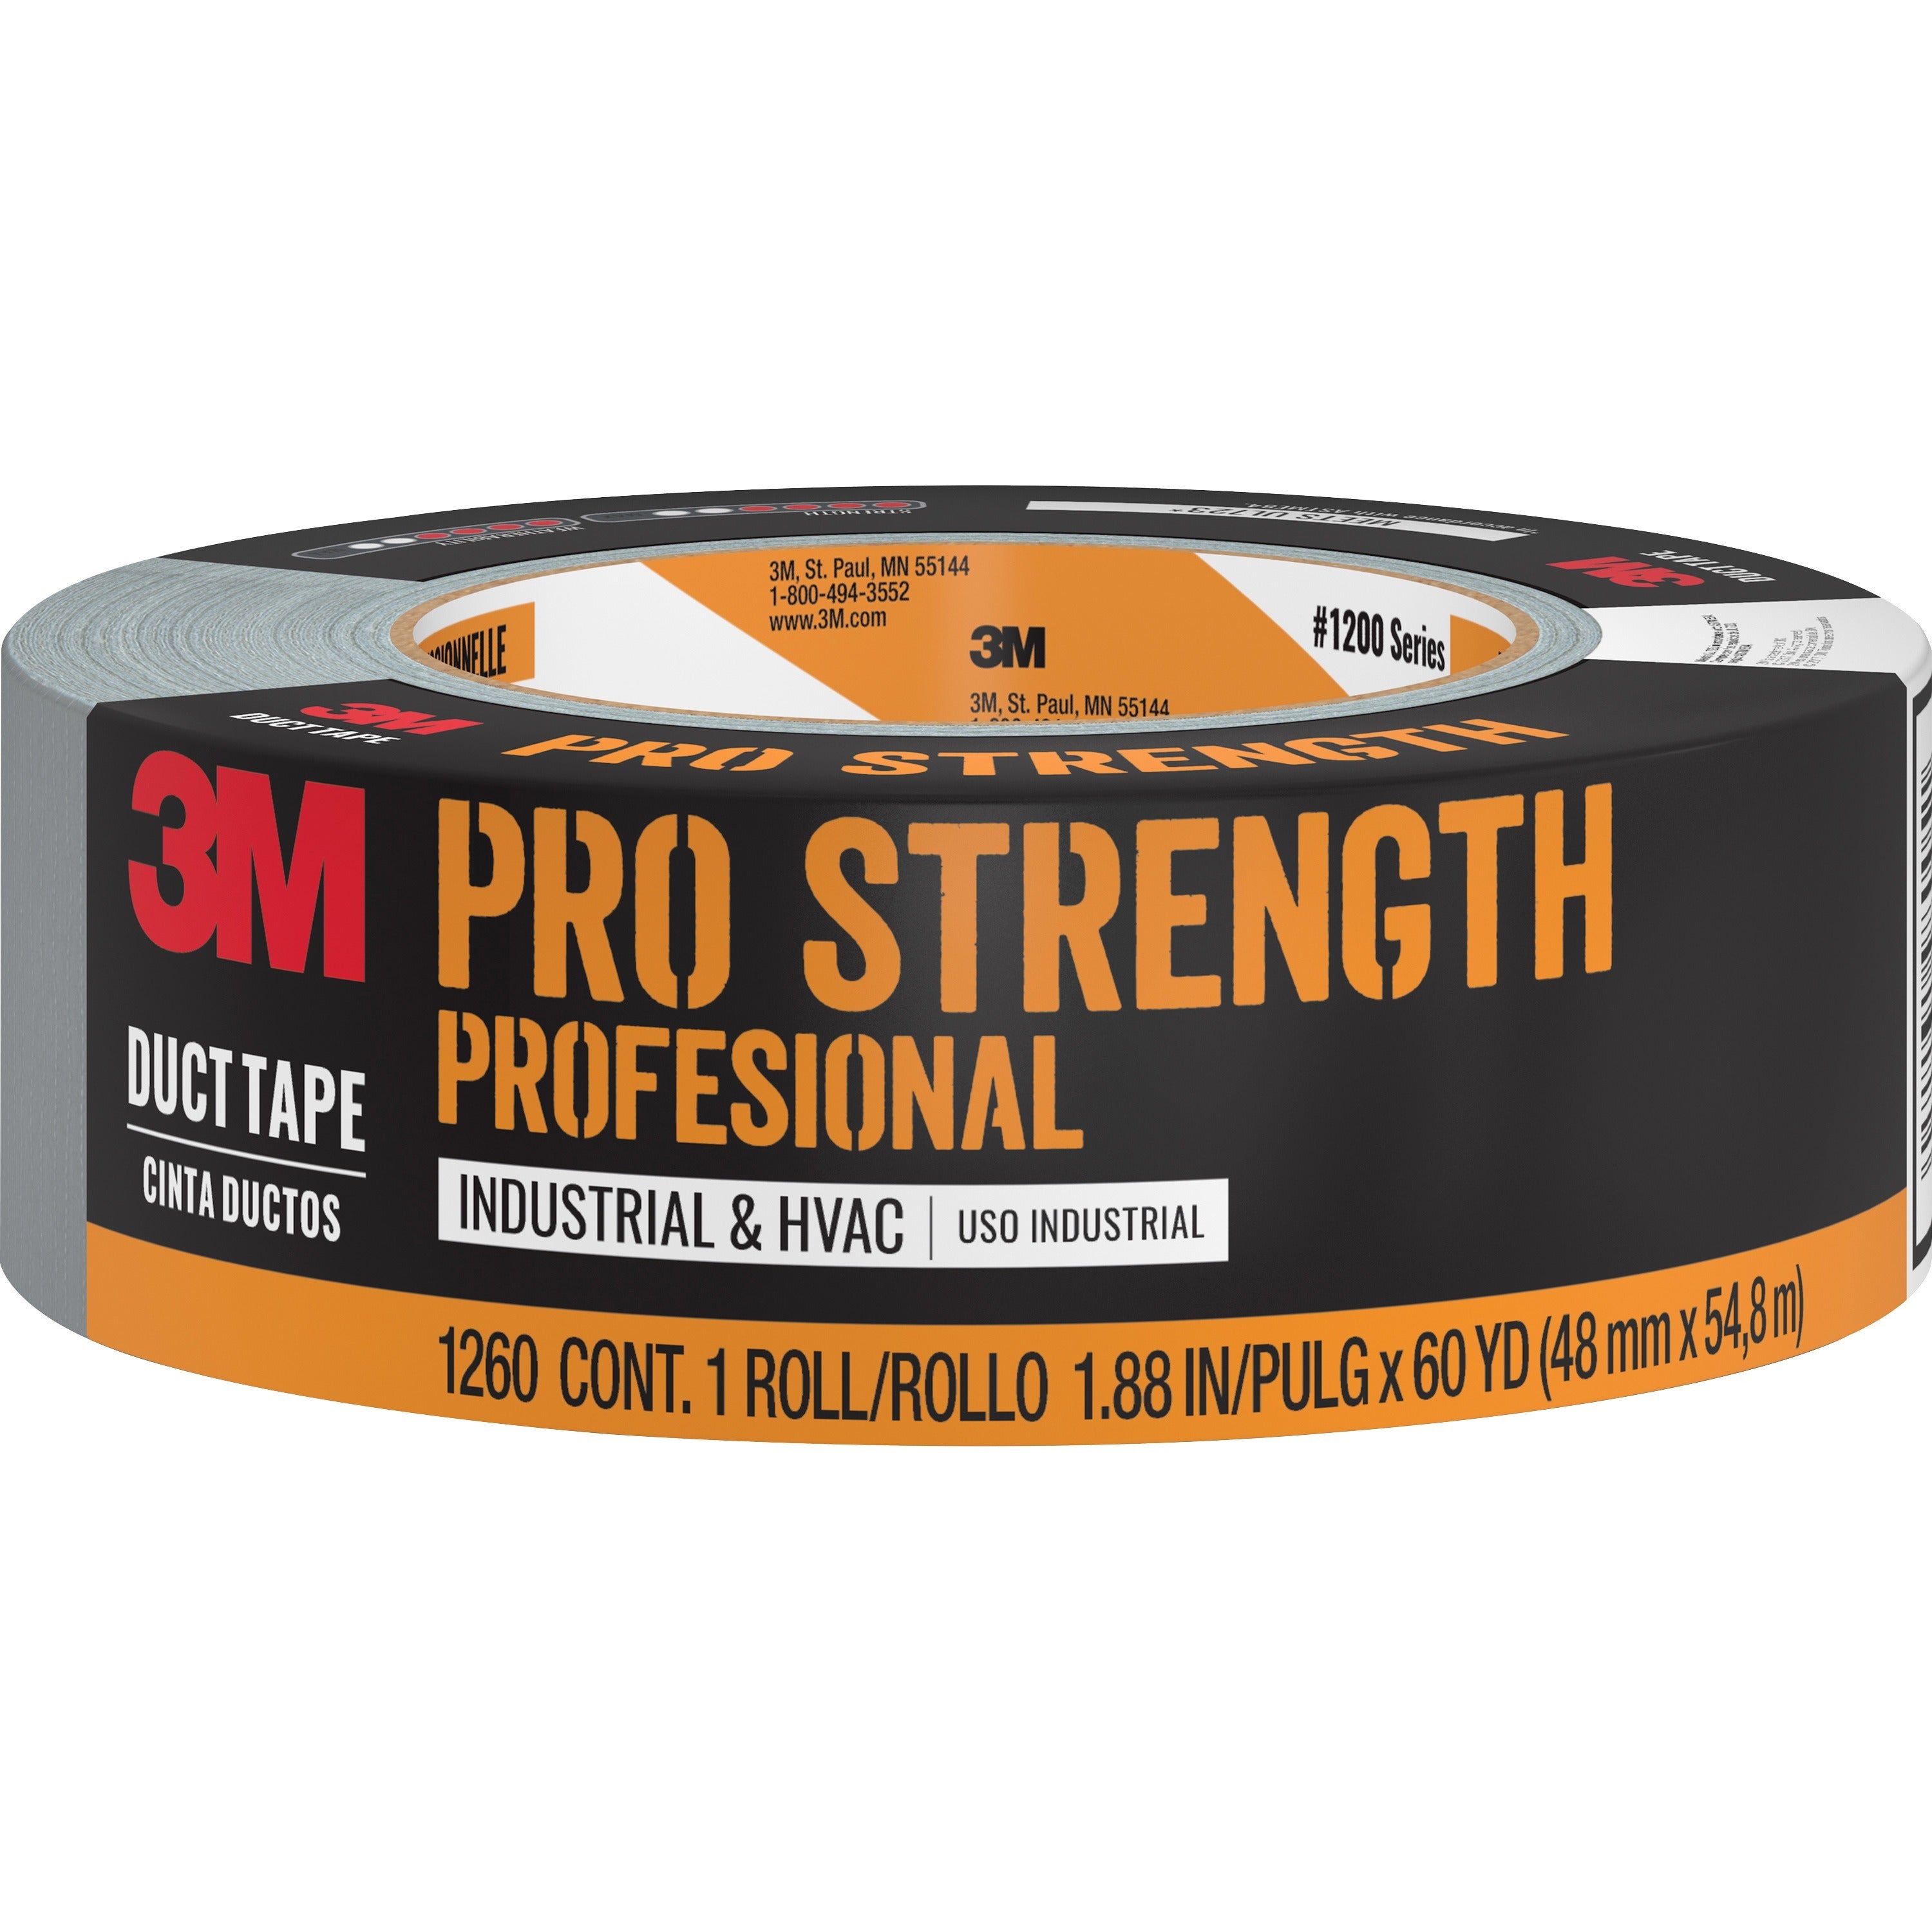 scotch-pro-strength-duct-tape-60-yd-length-x-188-width-3-core-polyethylene-coated-cloth-backing-water-proof-weather-resistant-moisture-resistant-for-multipurpose-repairing-1-roll-gray_mmm1260a - 1